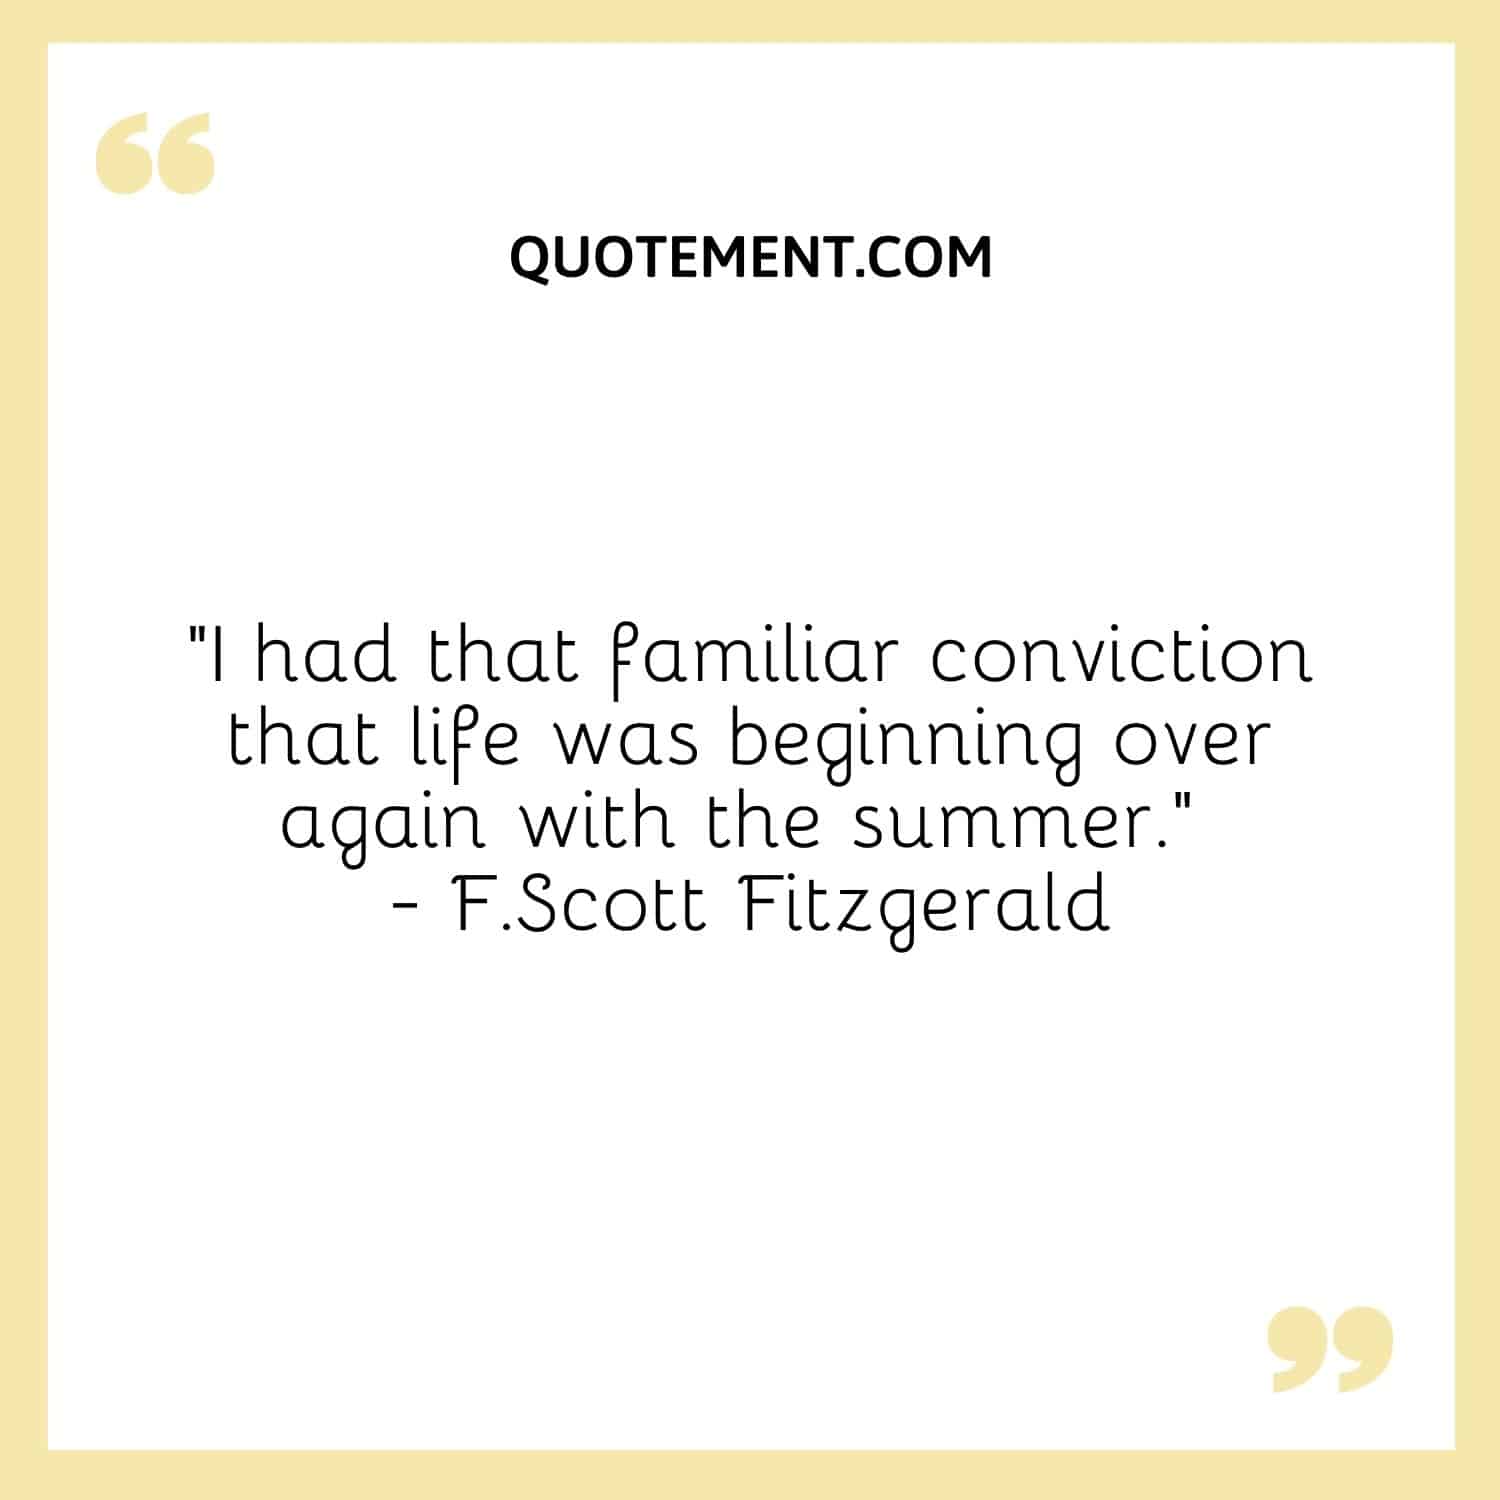 I had that familiar conviction that life was beginning over again with the summer. — F.Scott Fitzgerald